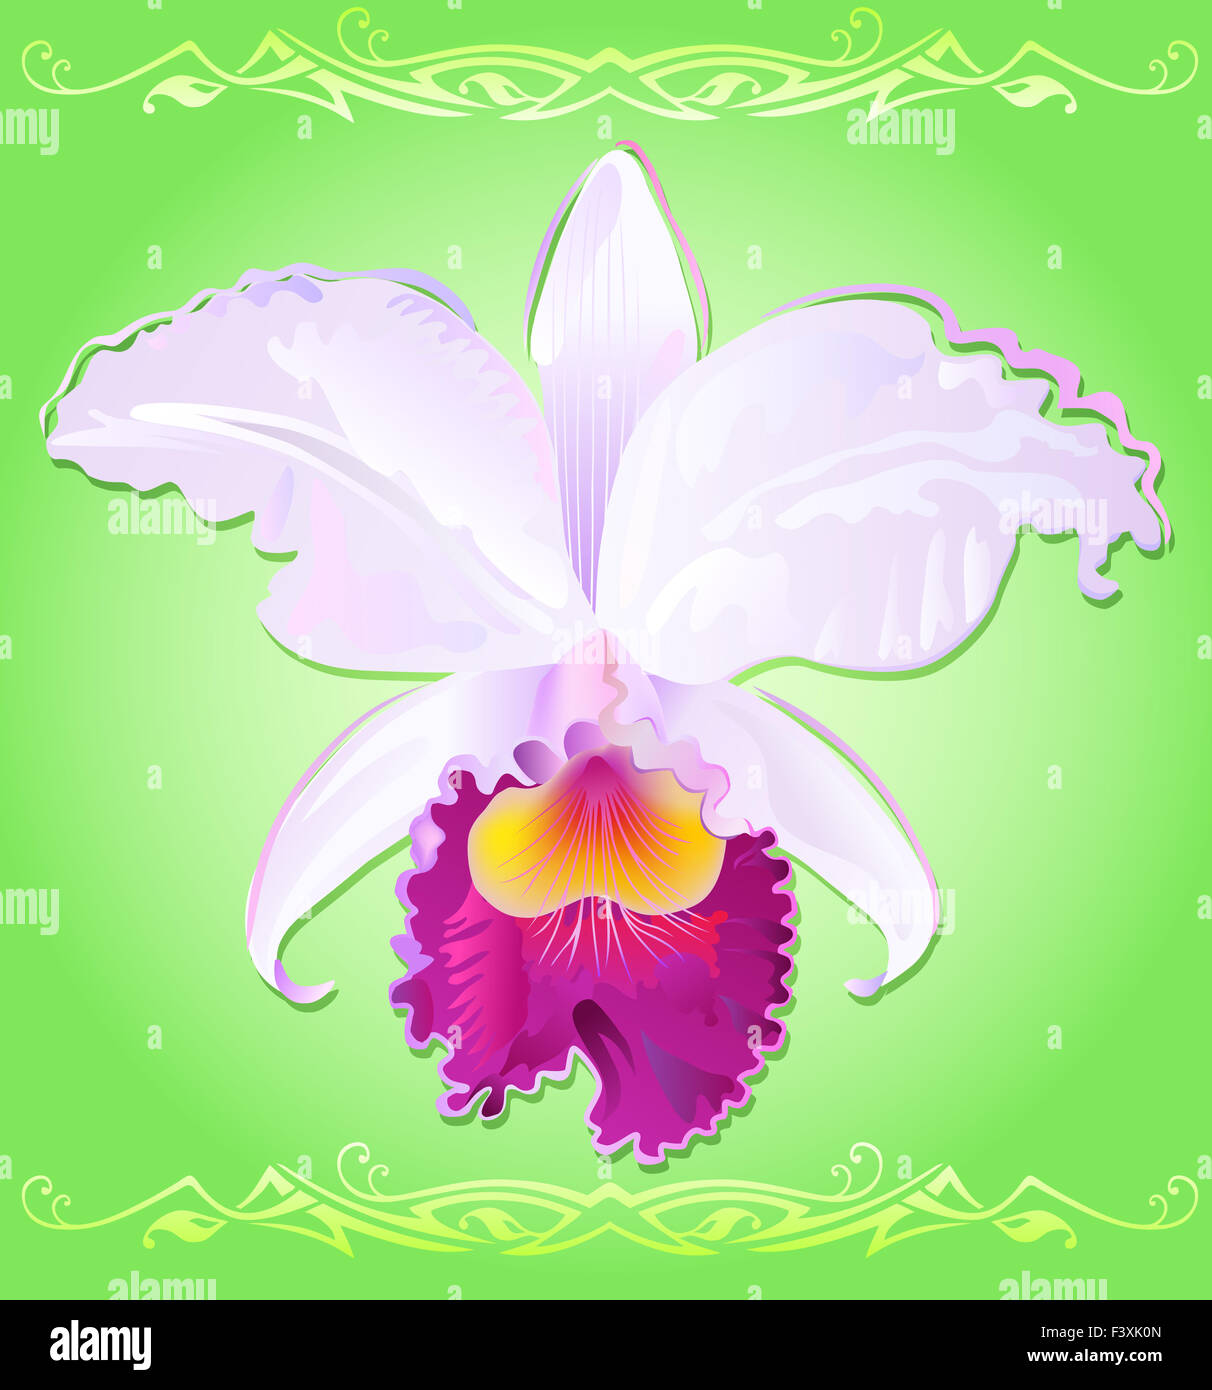 Illustration of orchid Cattleya Trianae Stock Photo